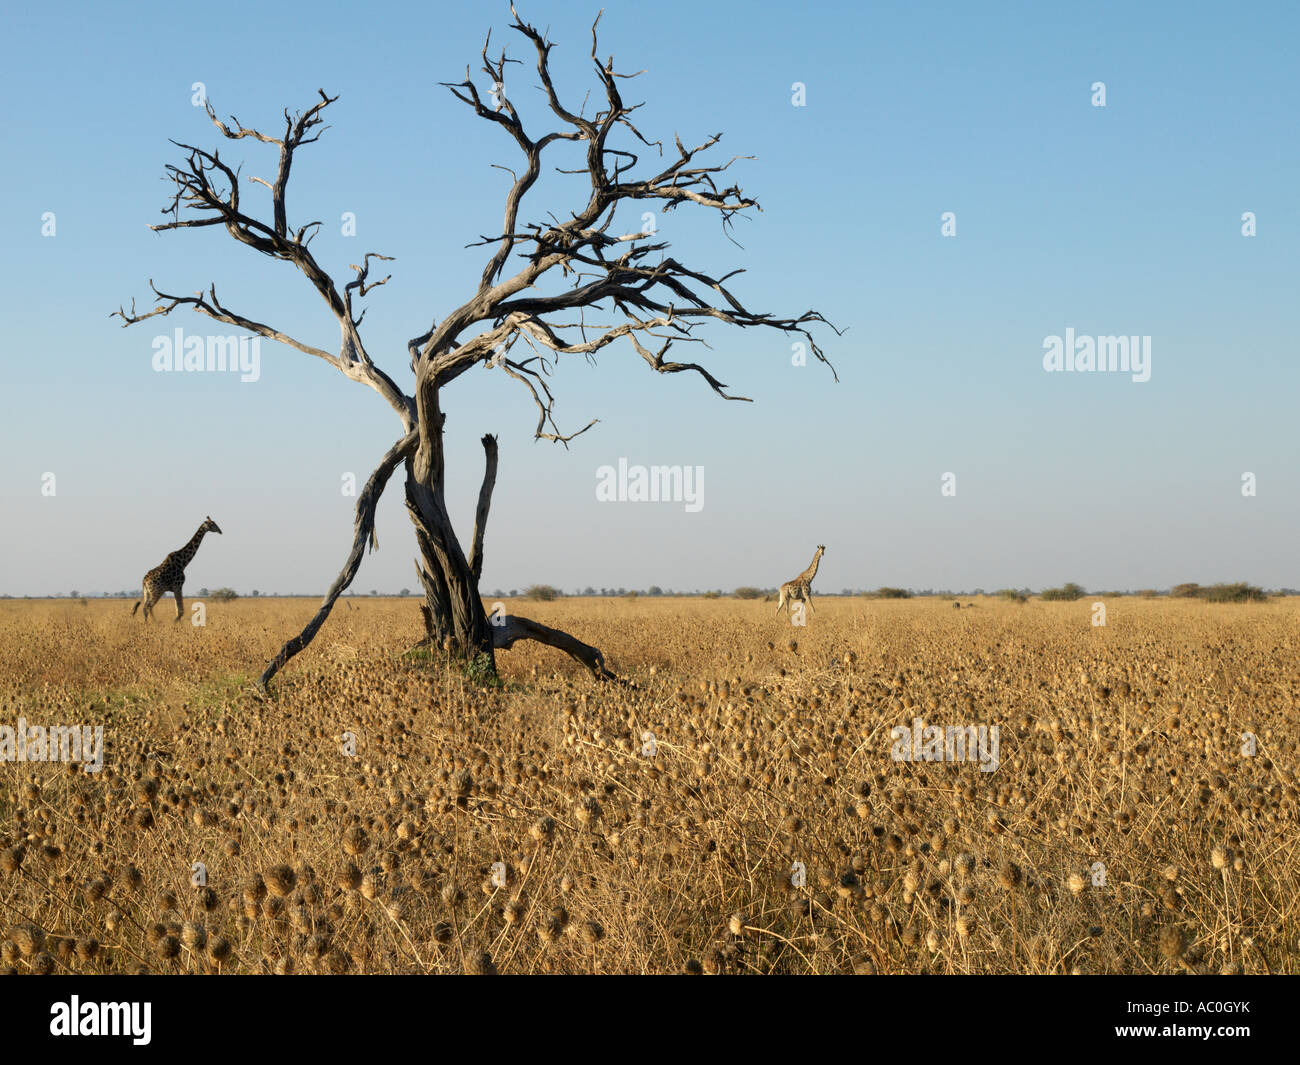 Two giraffes cross a semi arid land with dead trees and dry grass Stock Photo